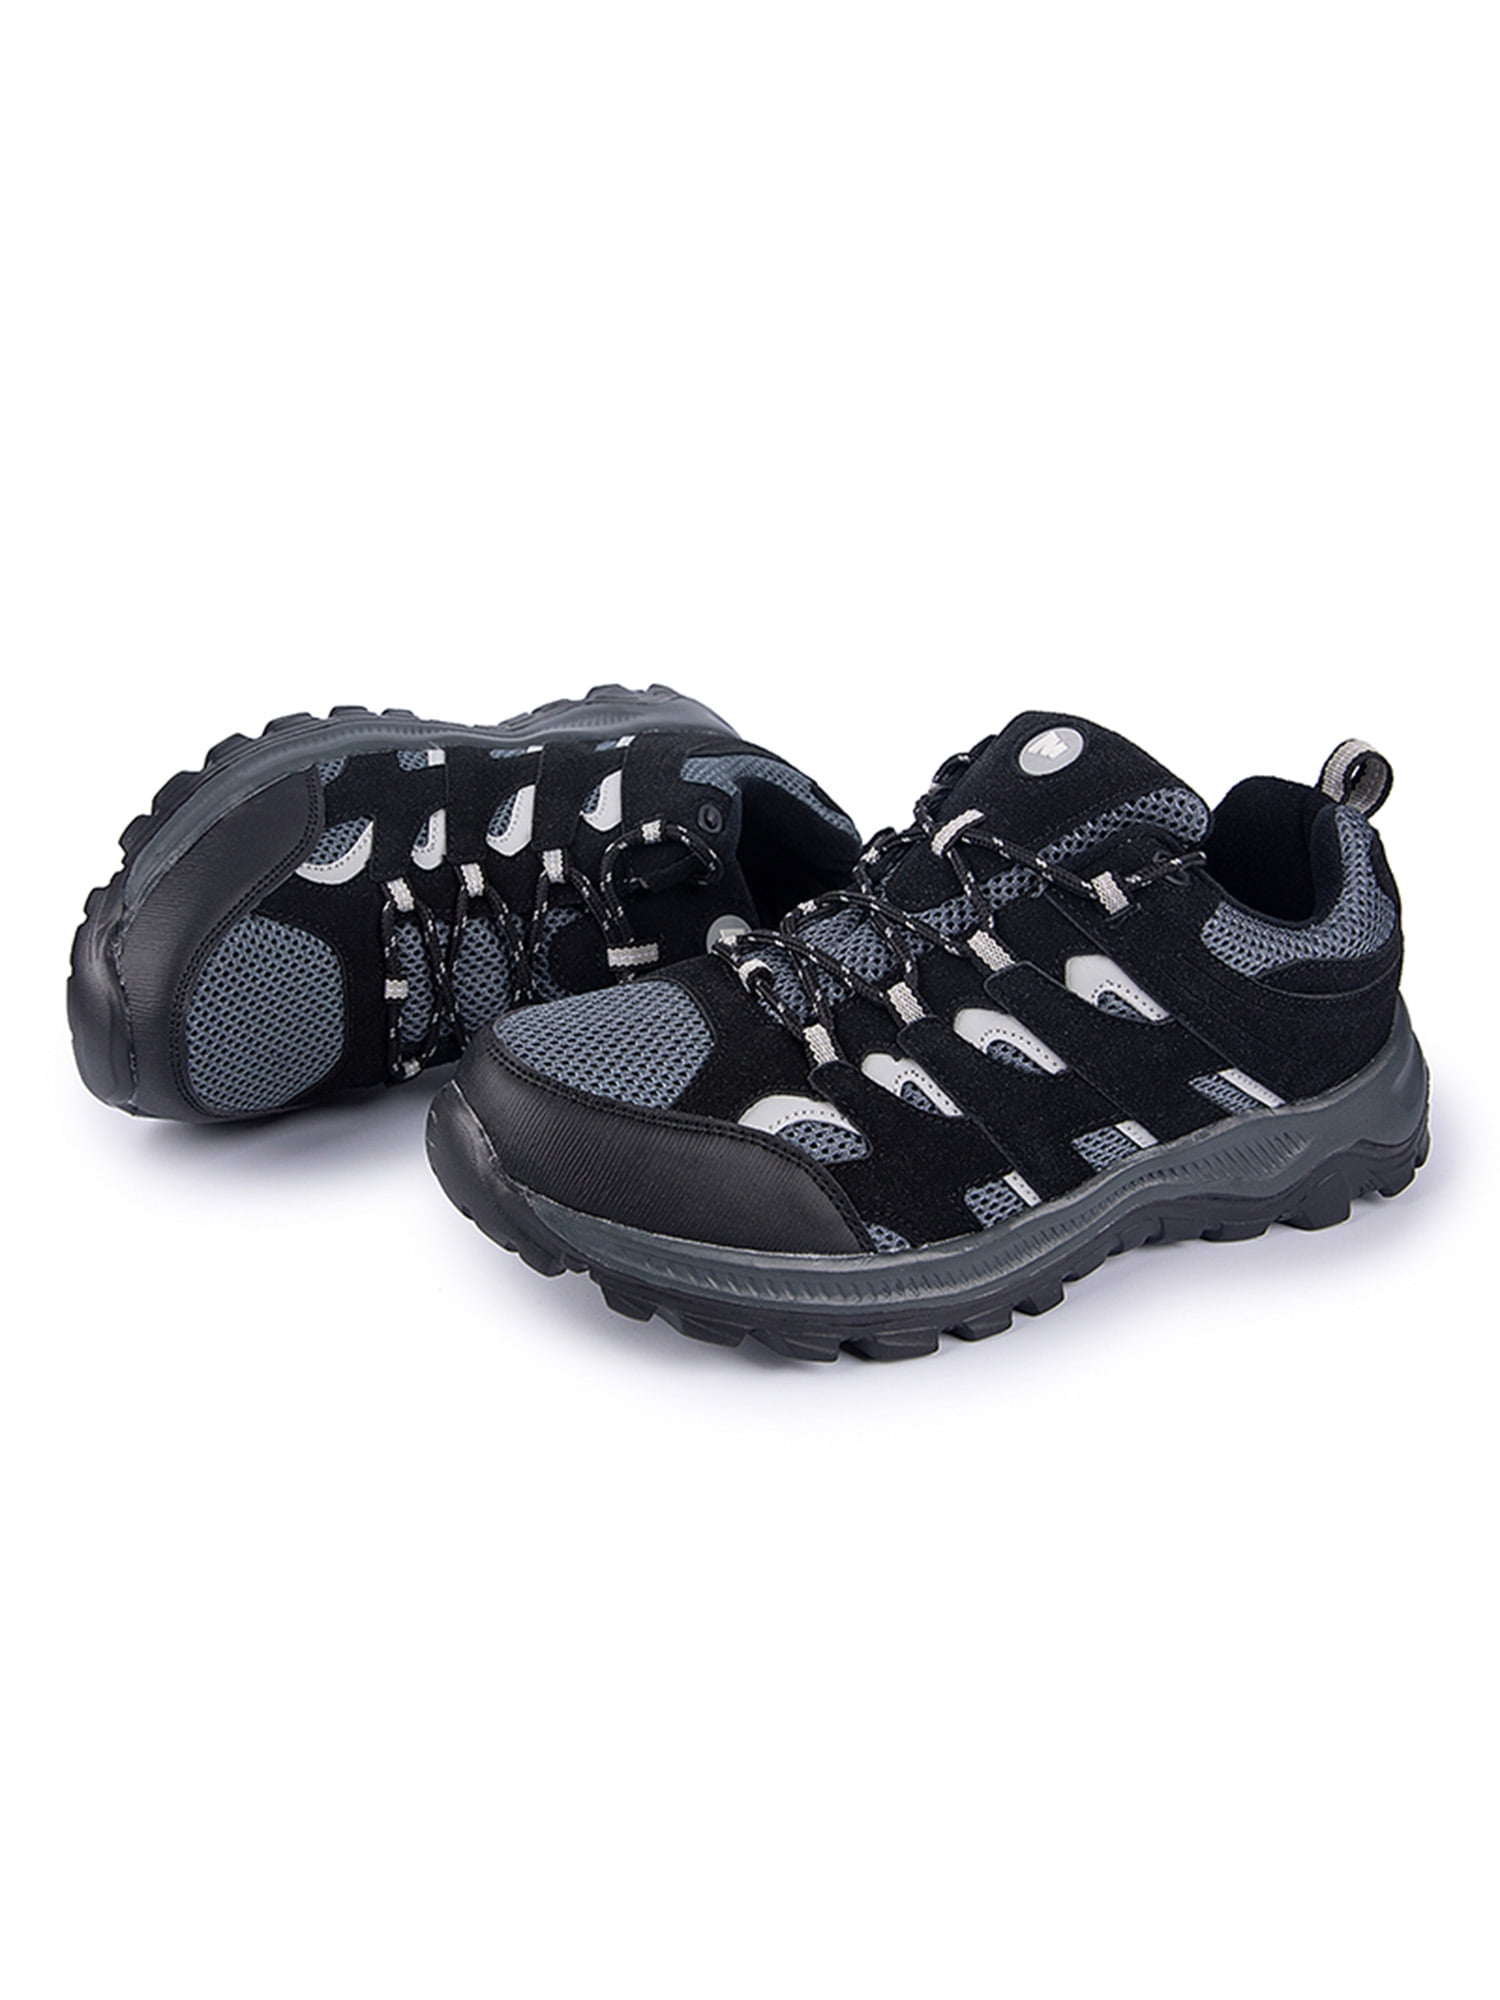 Details about   Men's Size Sneaker Steel Toe Cap Sports Safety Shoes Work Boots Running Hiking 